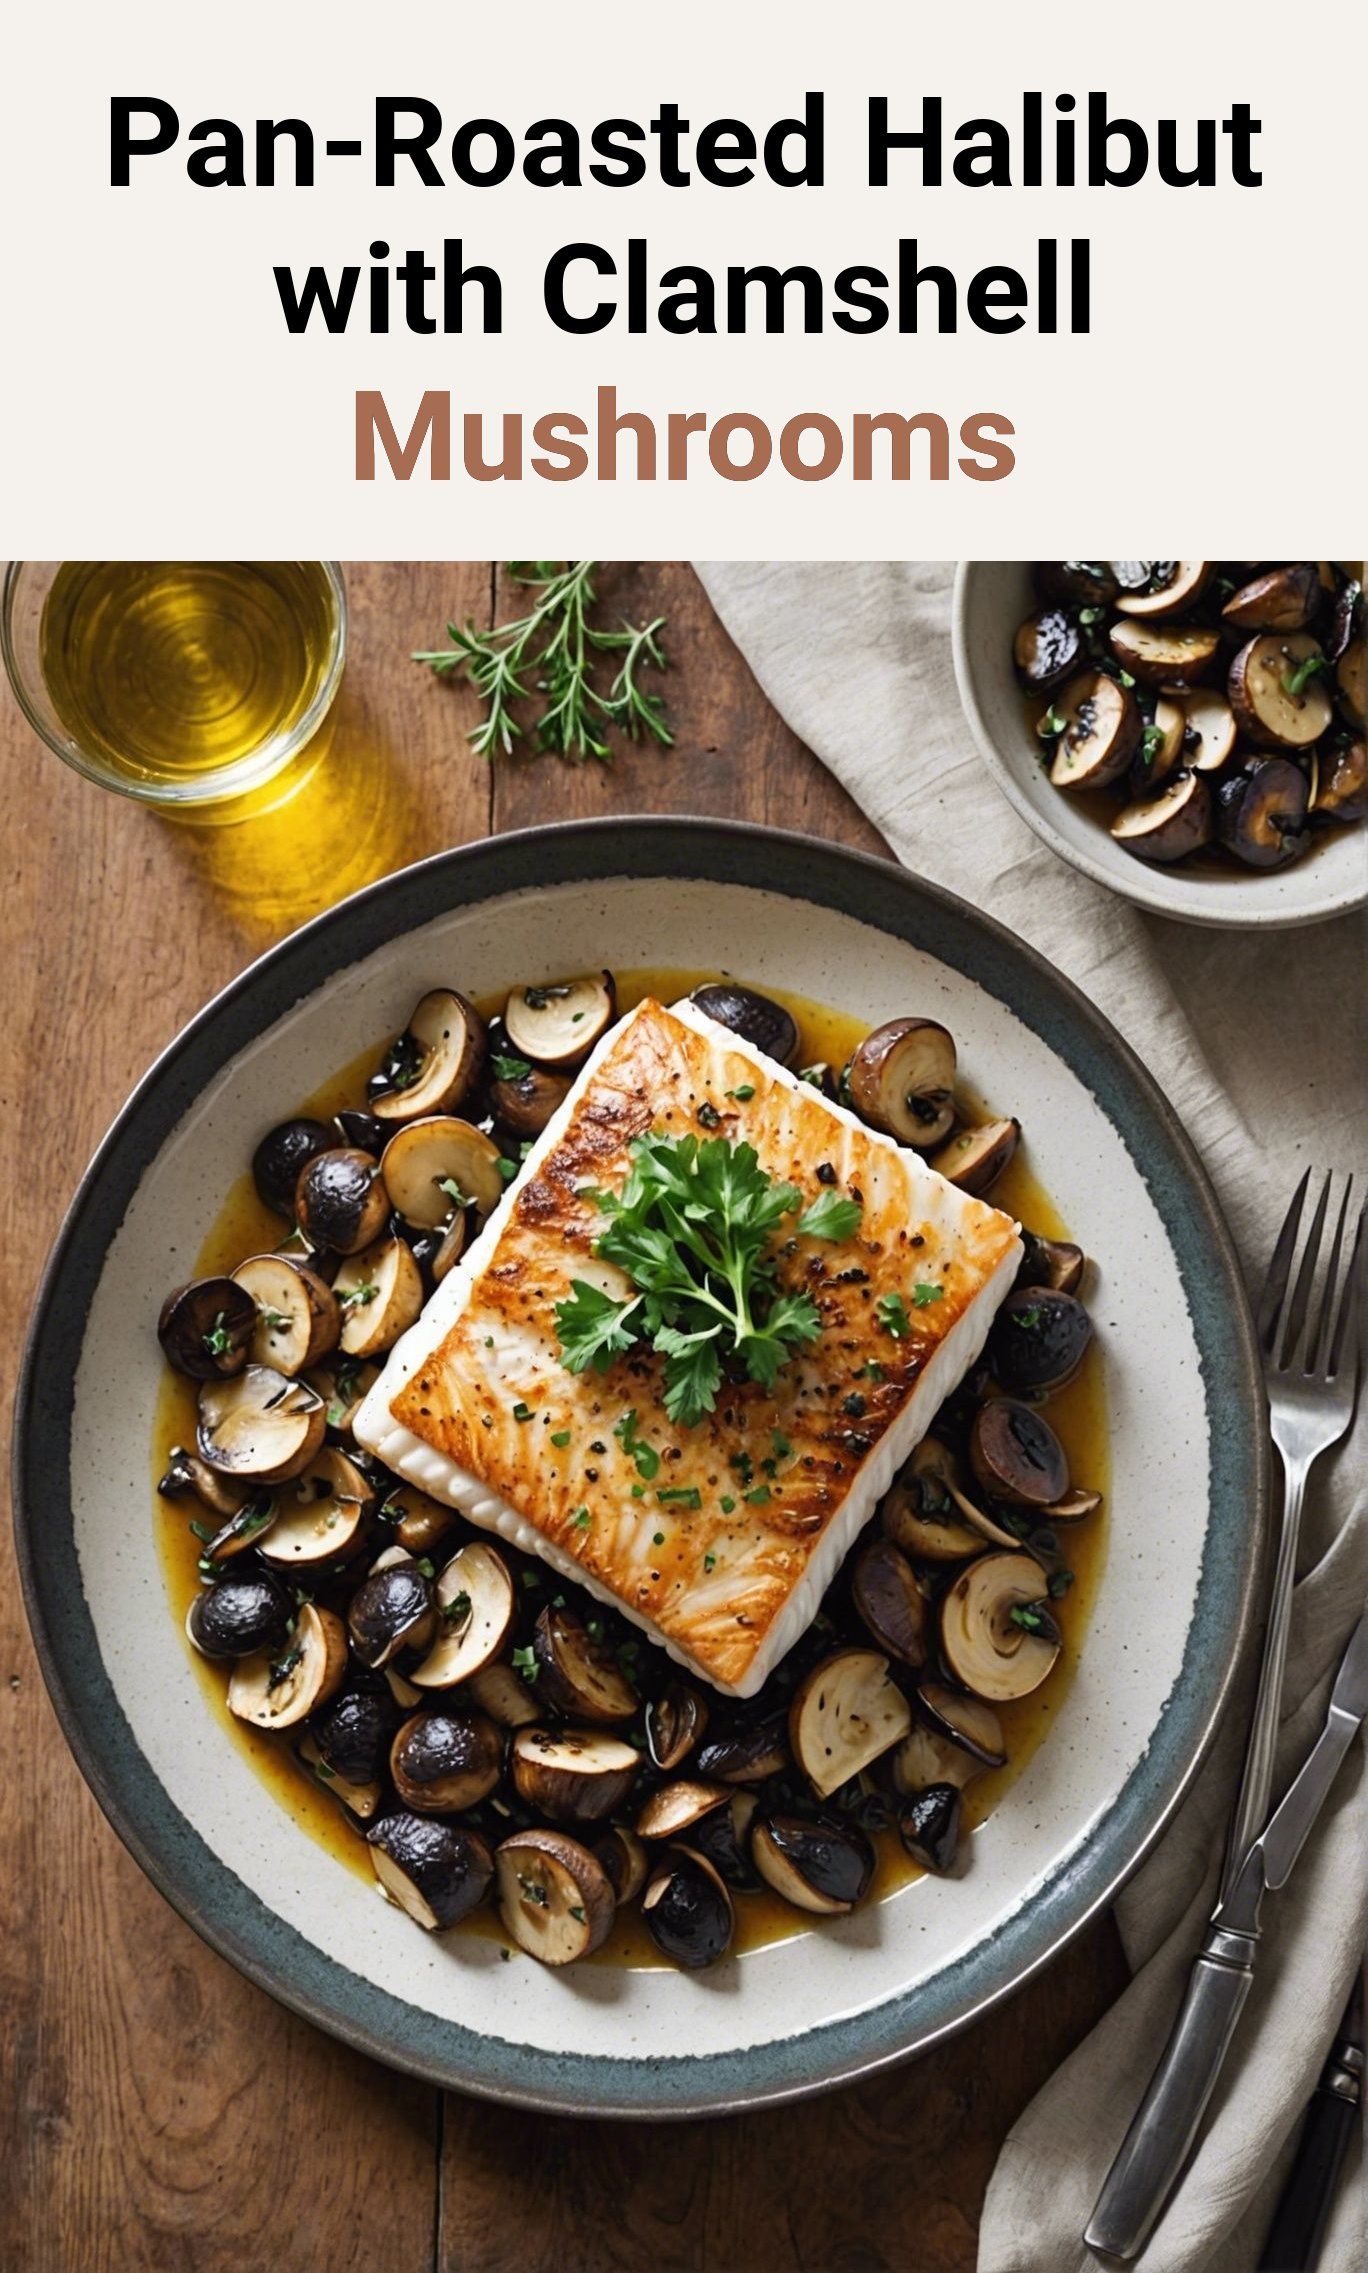 Pan-Roasted Halibut with Clamshell Mushrooms